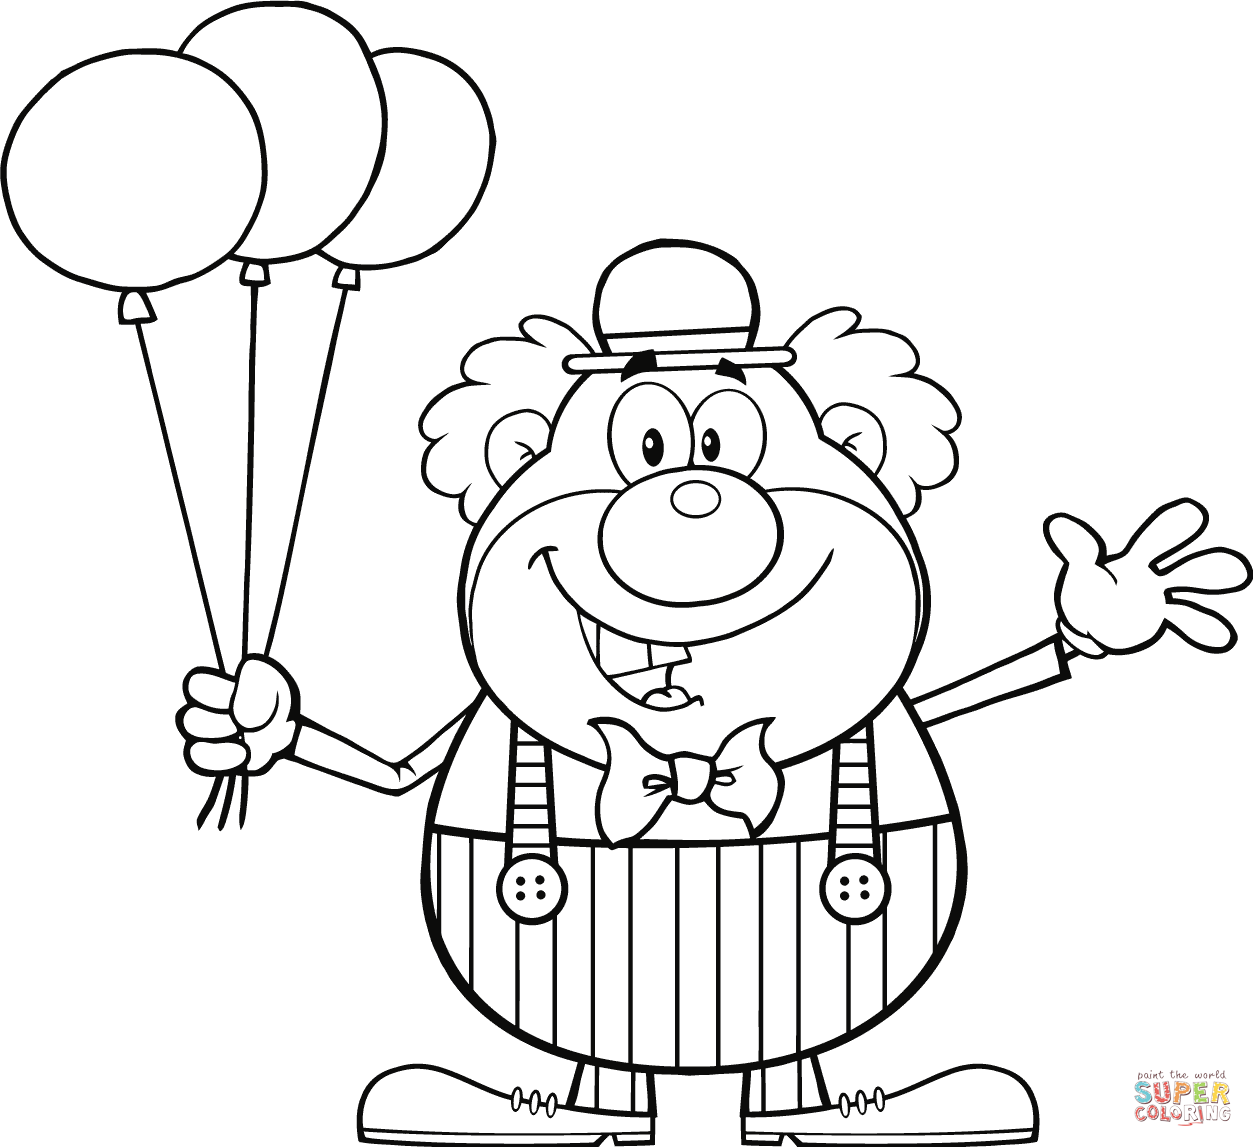 Clown With Balloons Coloring Page Free Printable Coloring Pages Coloring Pages Free P